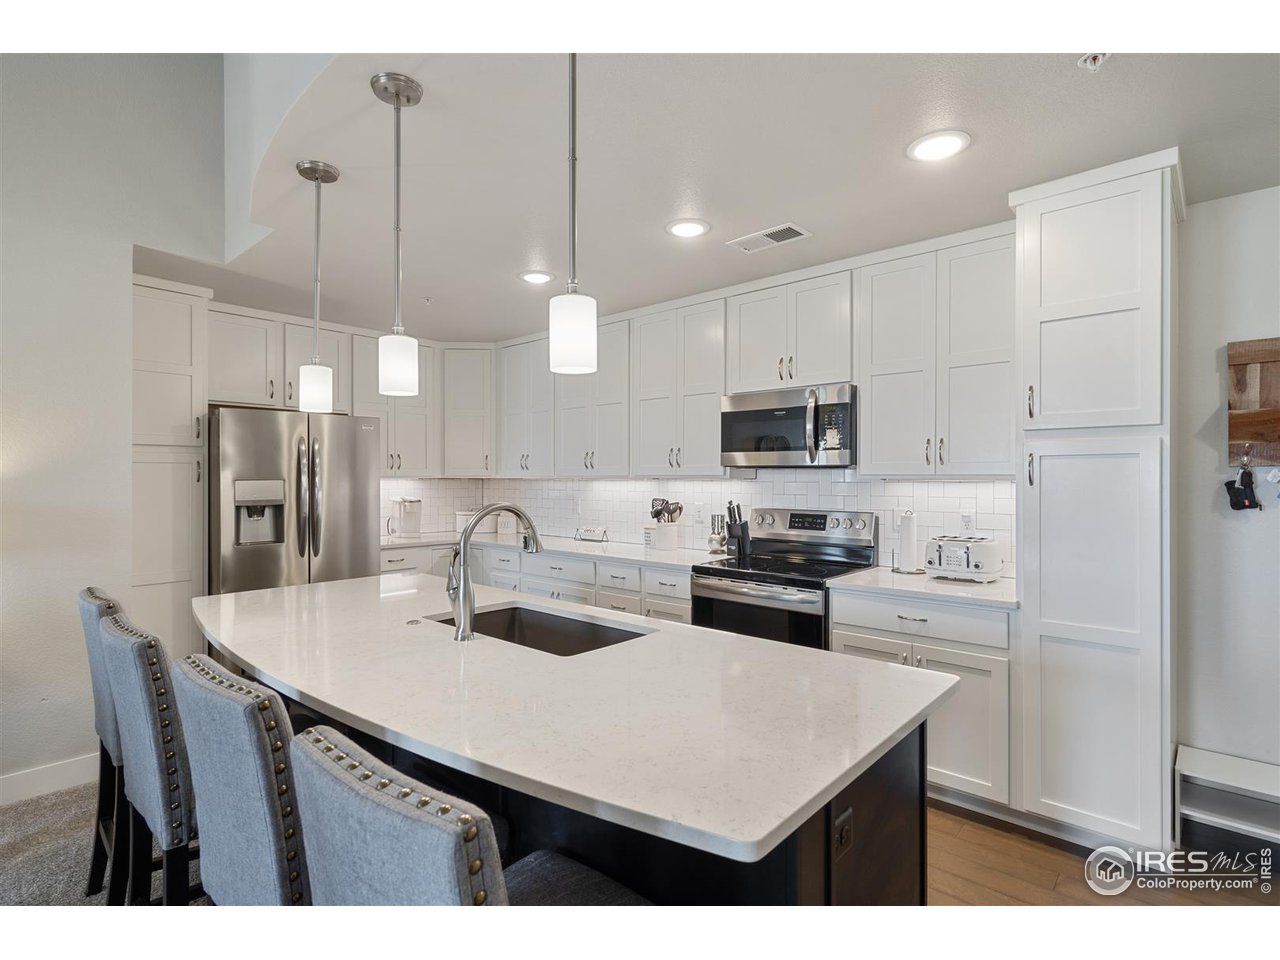 Gorgeous kitchen features Quartz counters, stainless steel appliances (all stay), dual pantry spaces, composite undermount sink, tile backsplash, and large island with bar!